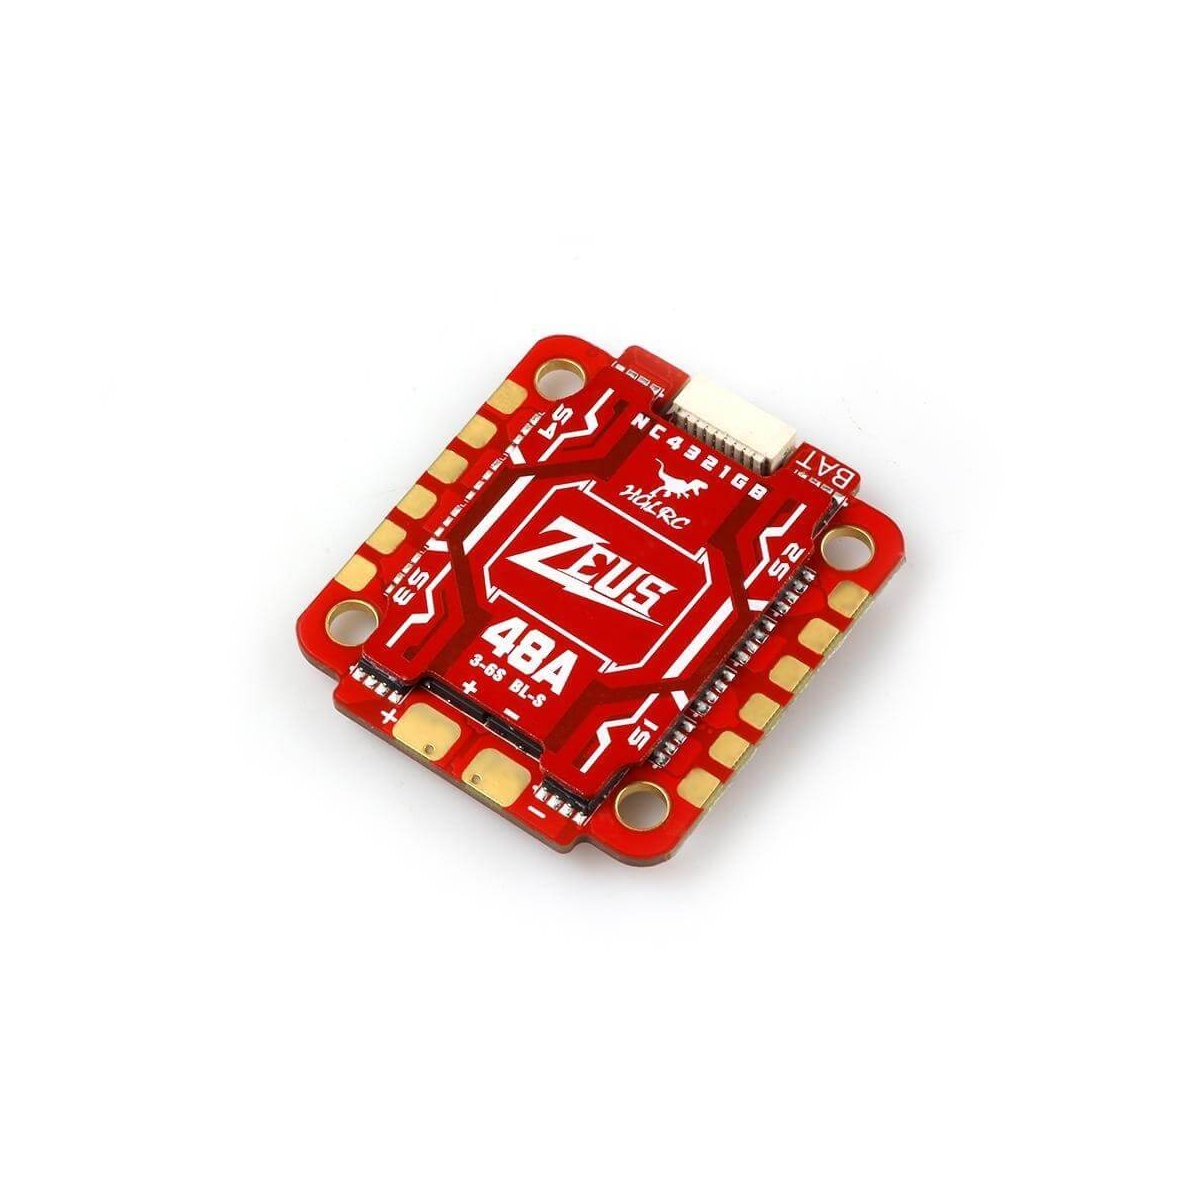 ESC for FPV racing drone with camera